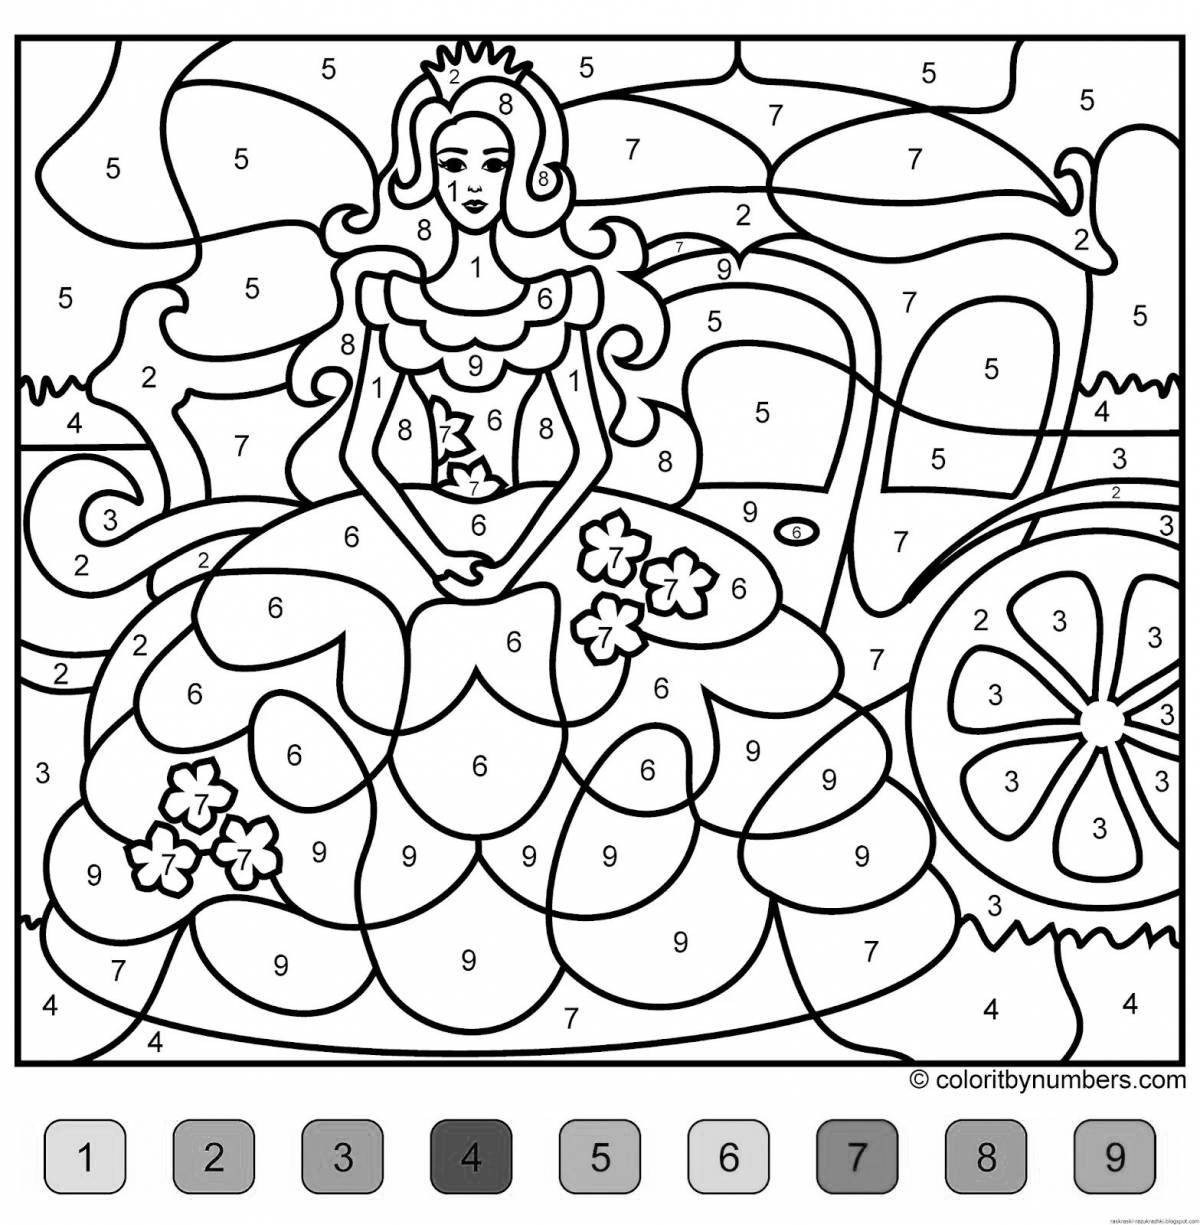 Creative coloring game for girls 3 years old